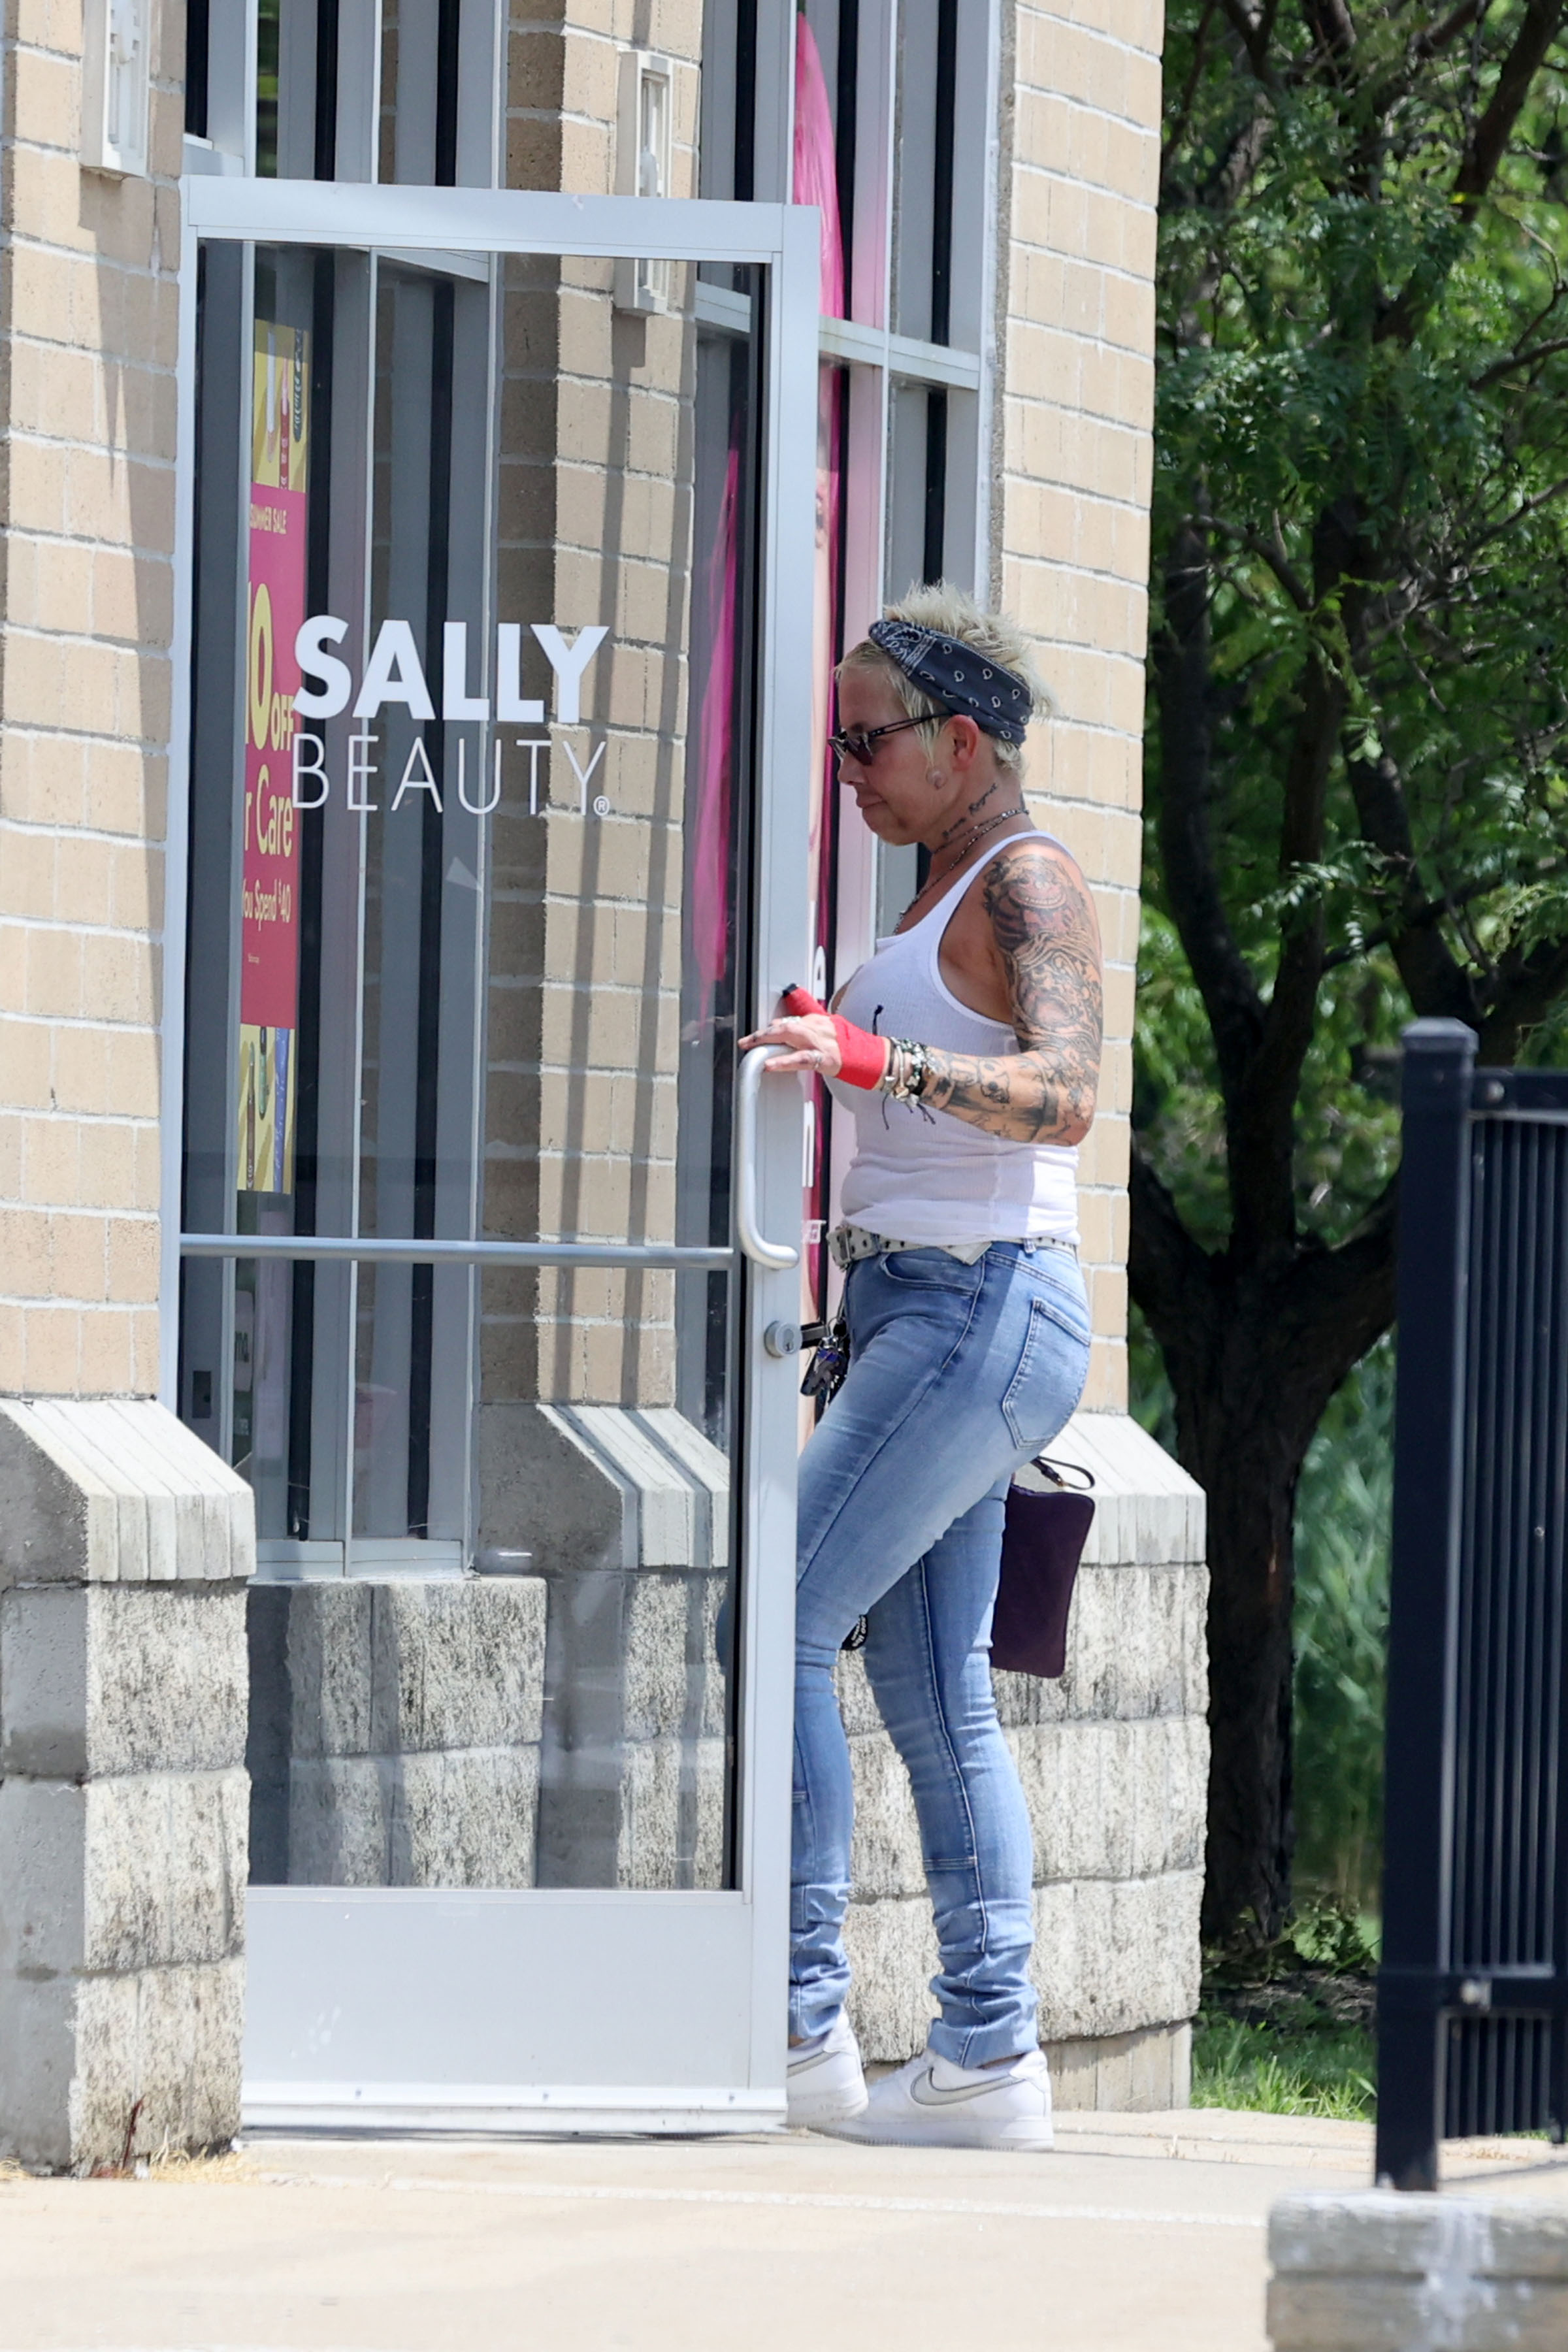 Eminem's ex-wife Kim headed into a Sally Beauty store wearing a white tank top and jeans